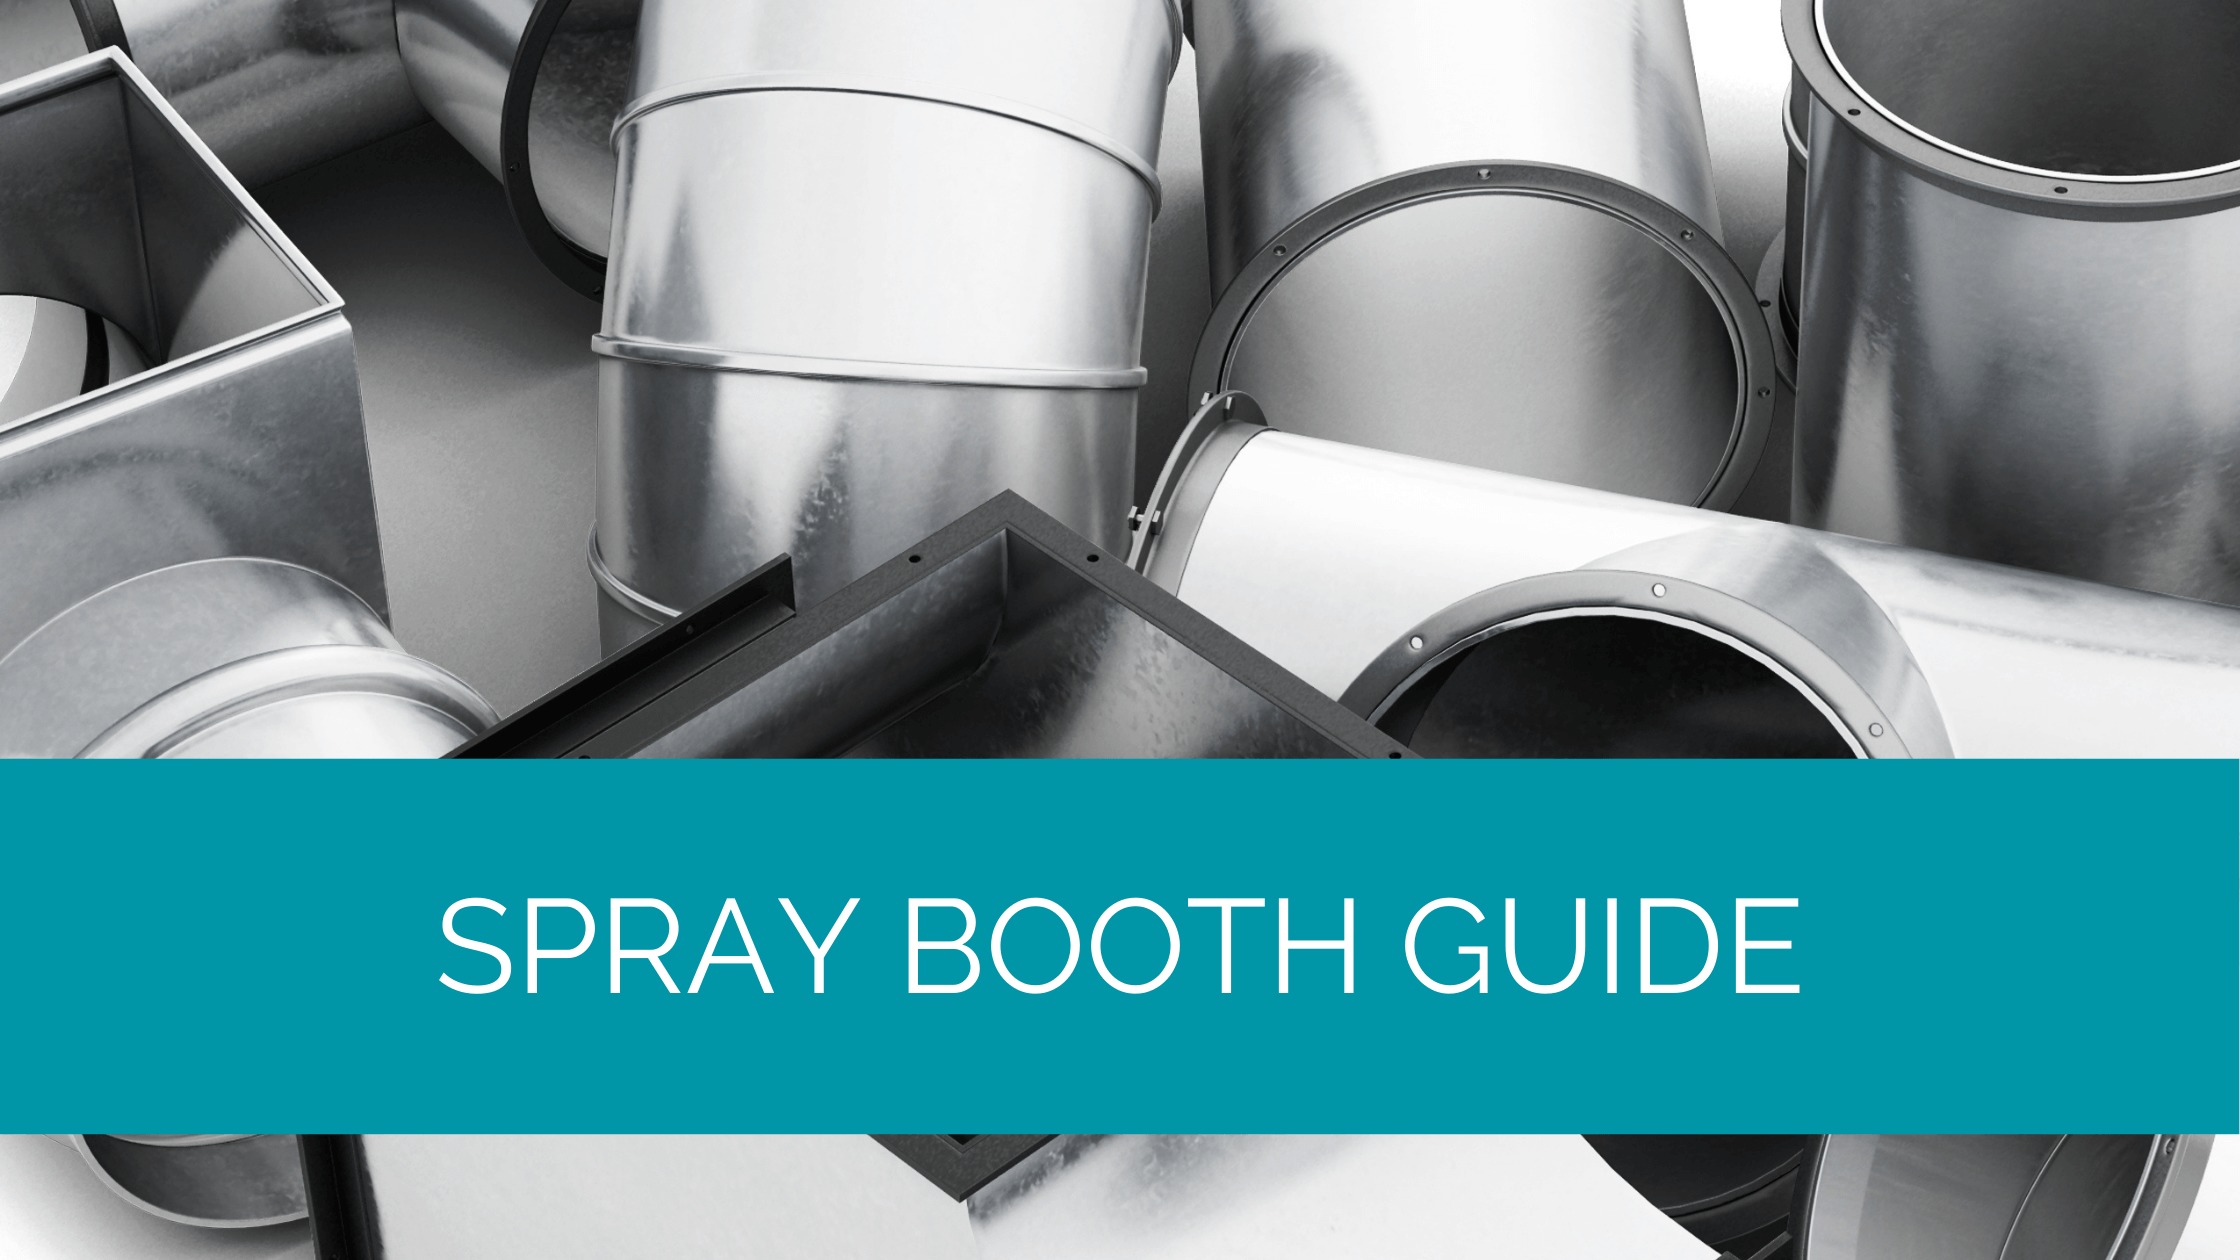 Spray Booth Guide